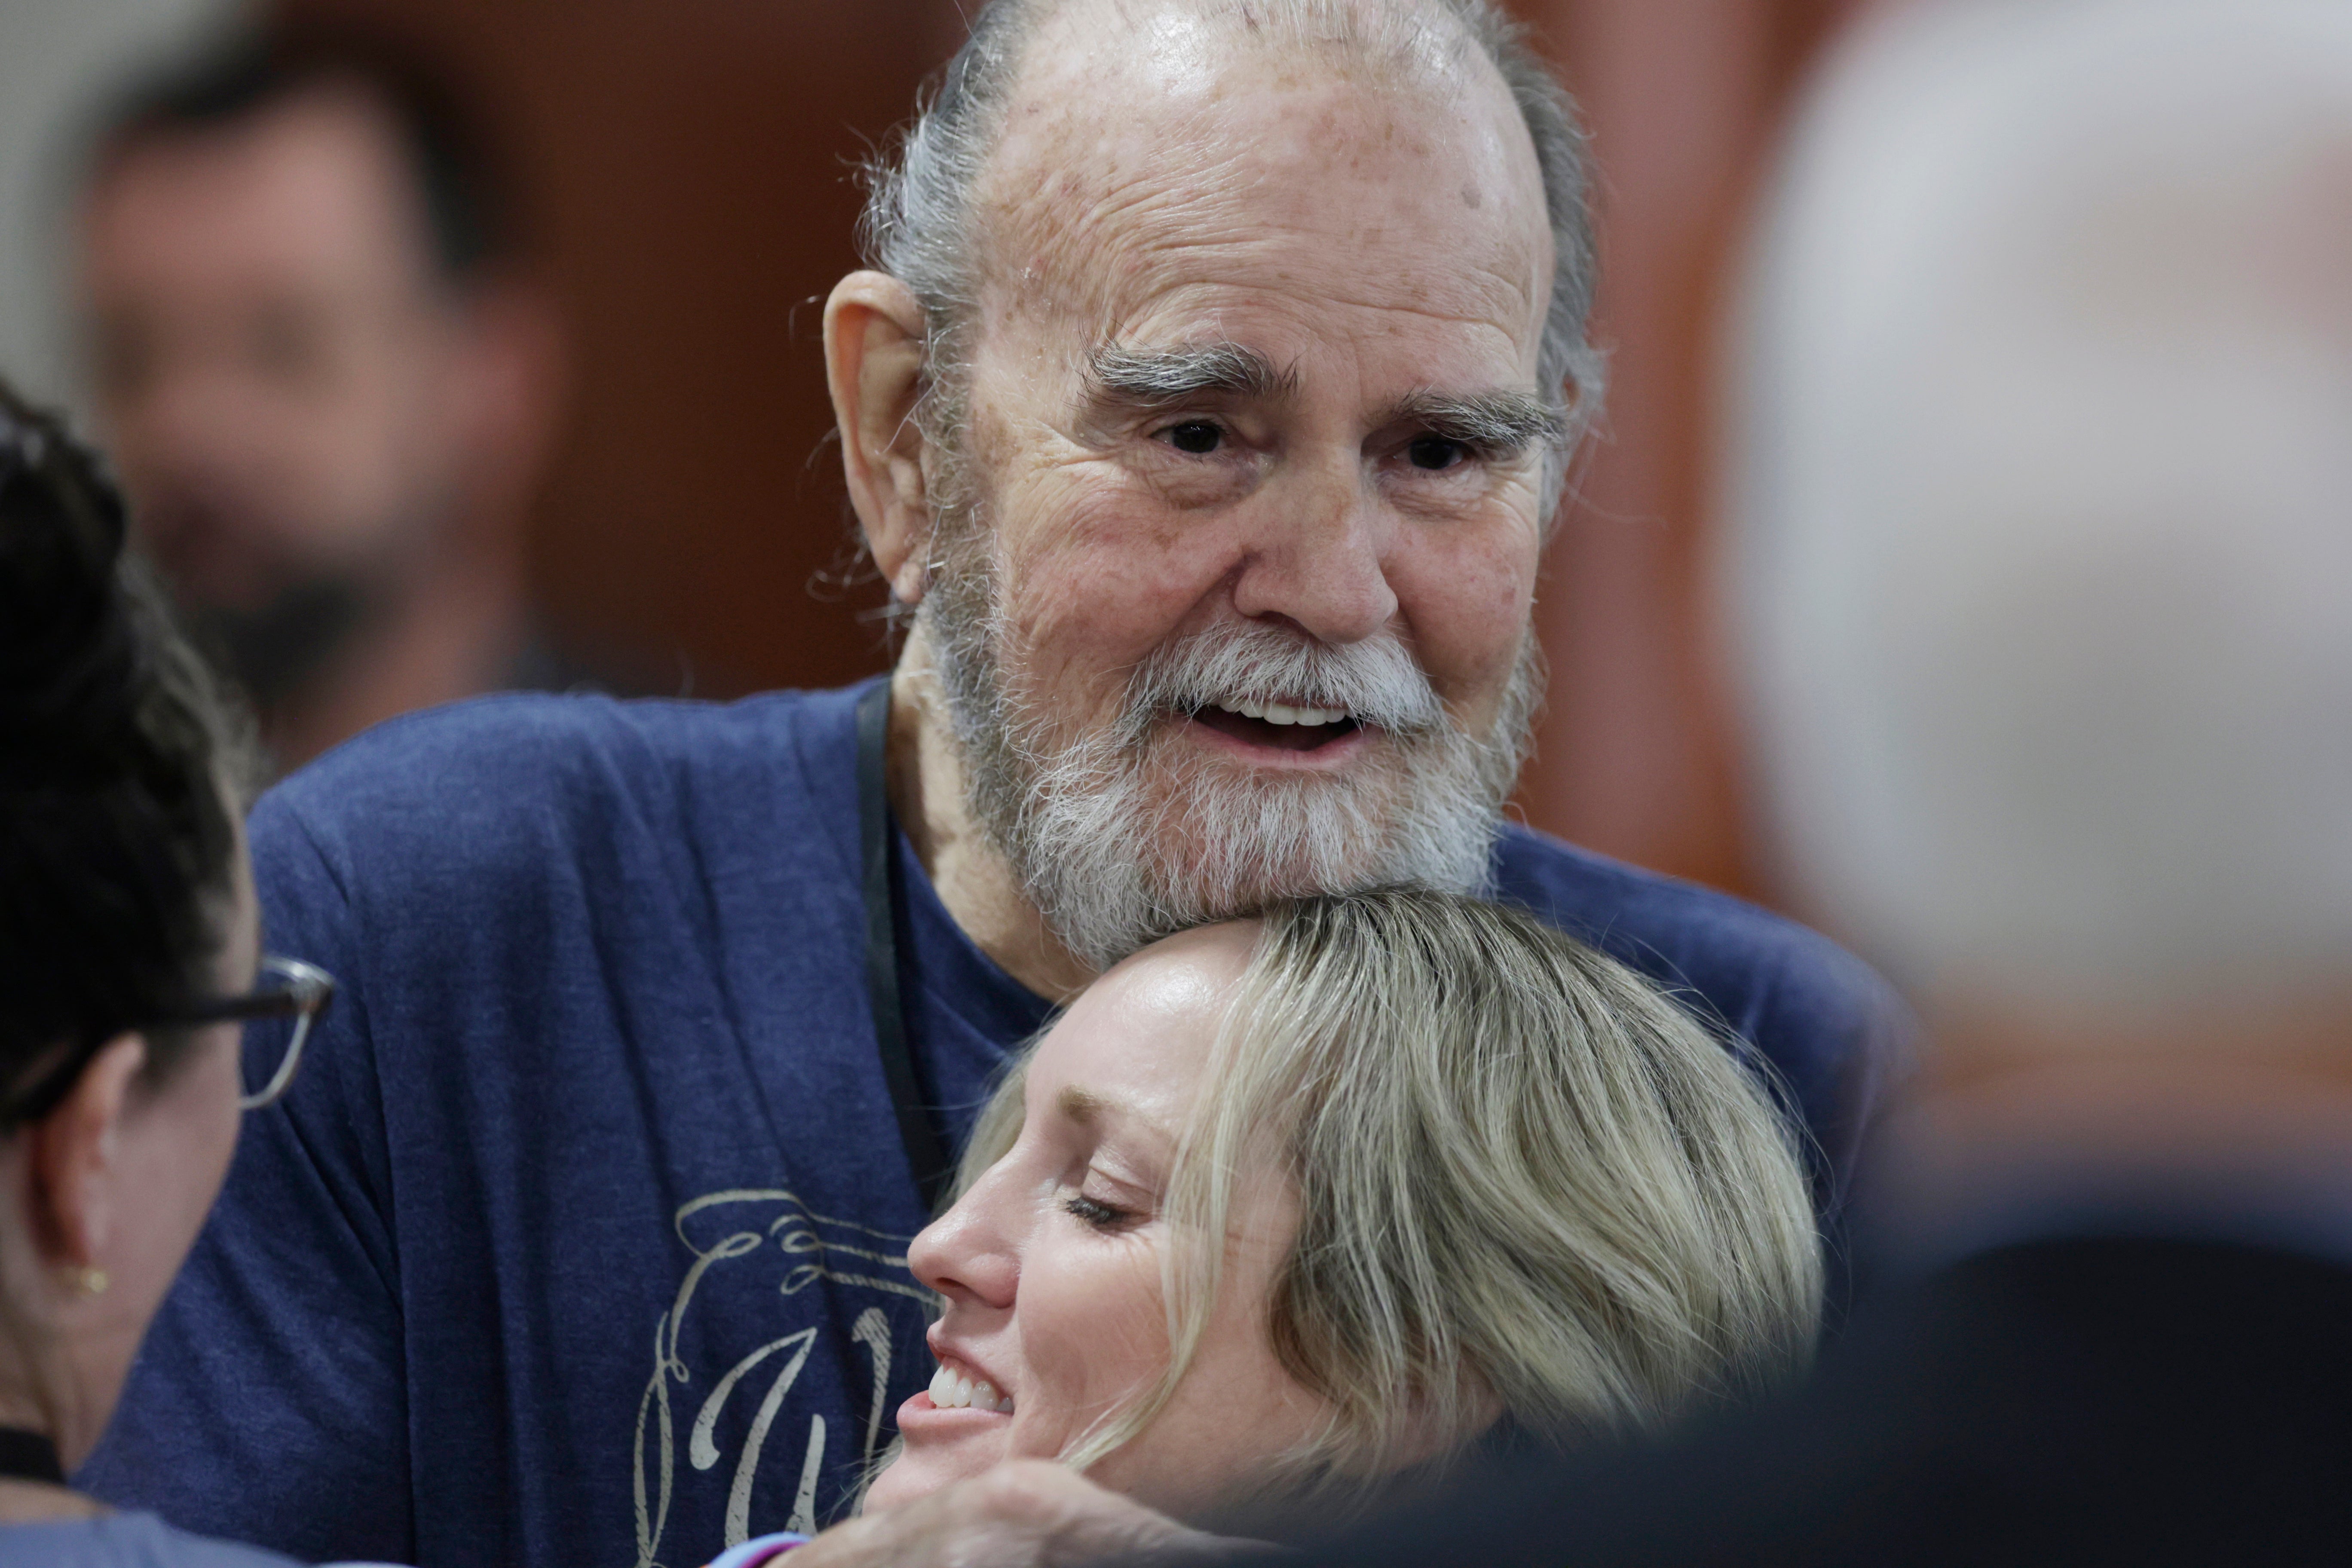 Larry Woodcock hugs an attendee after the verdict was read in the Lori Vallow trial last year